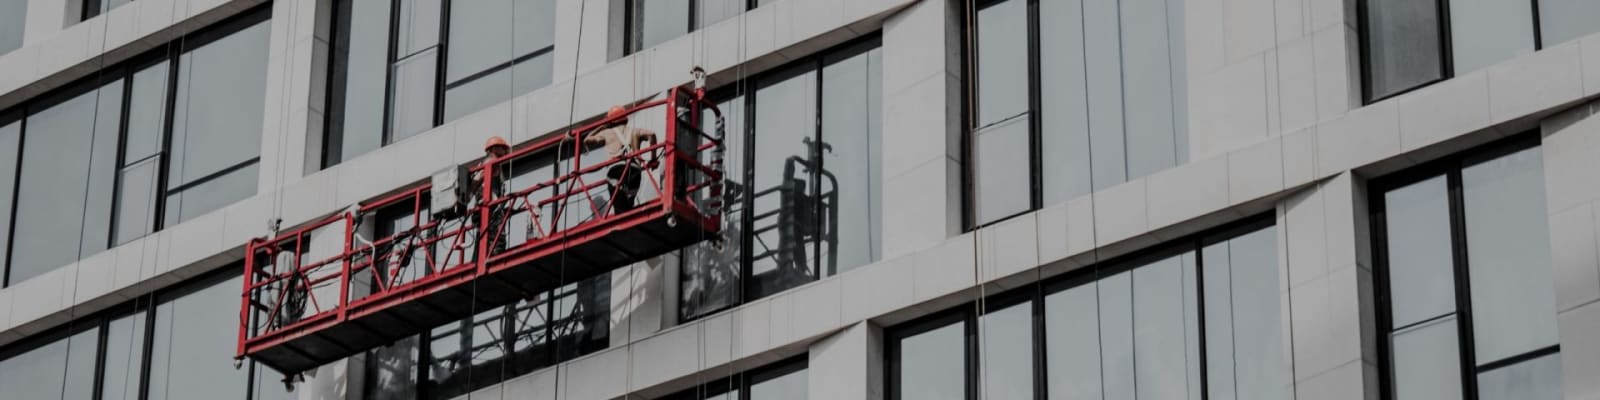 window cleaning services pros in Durban